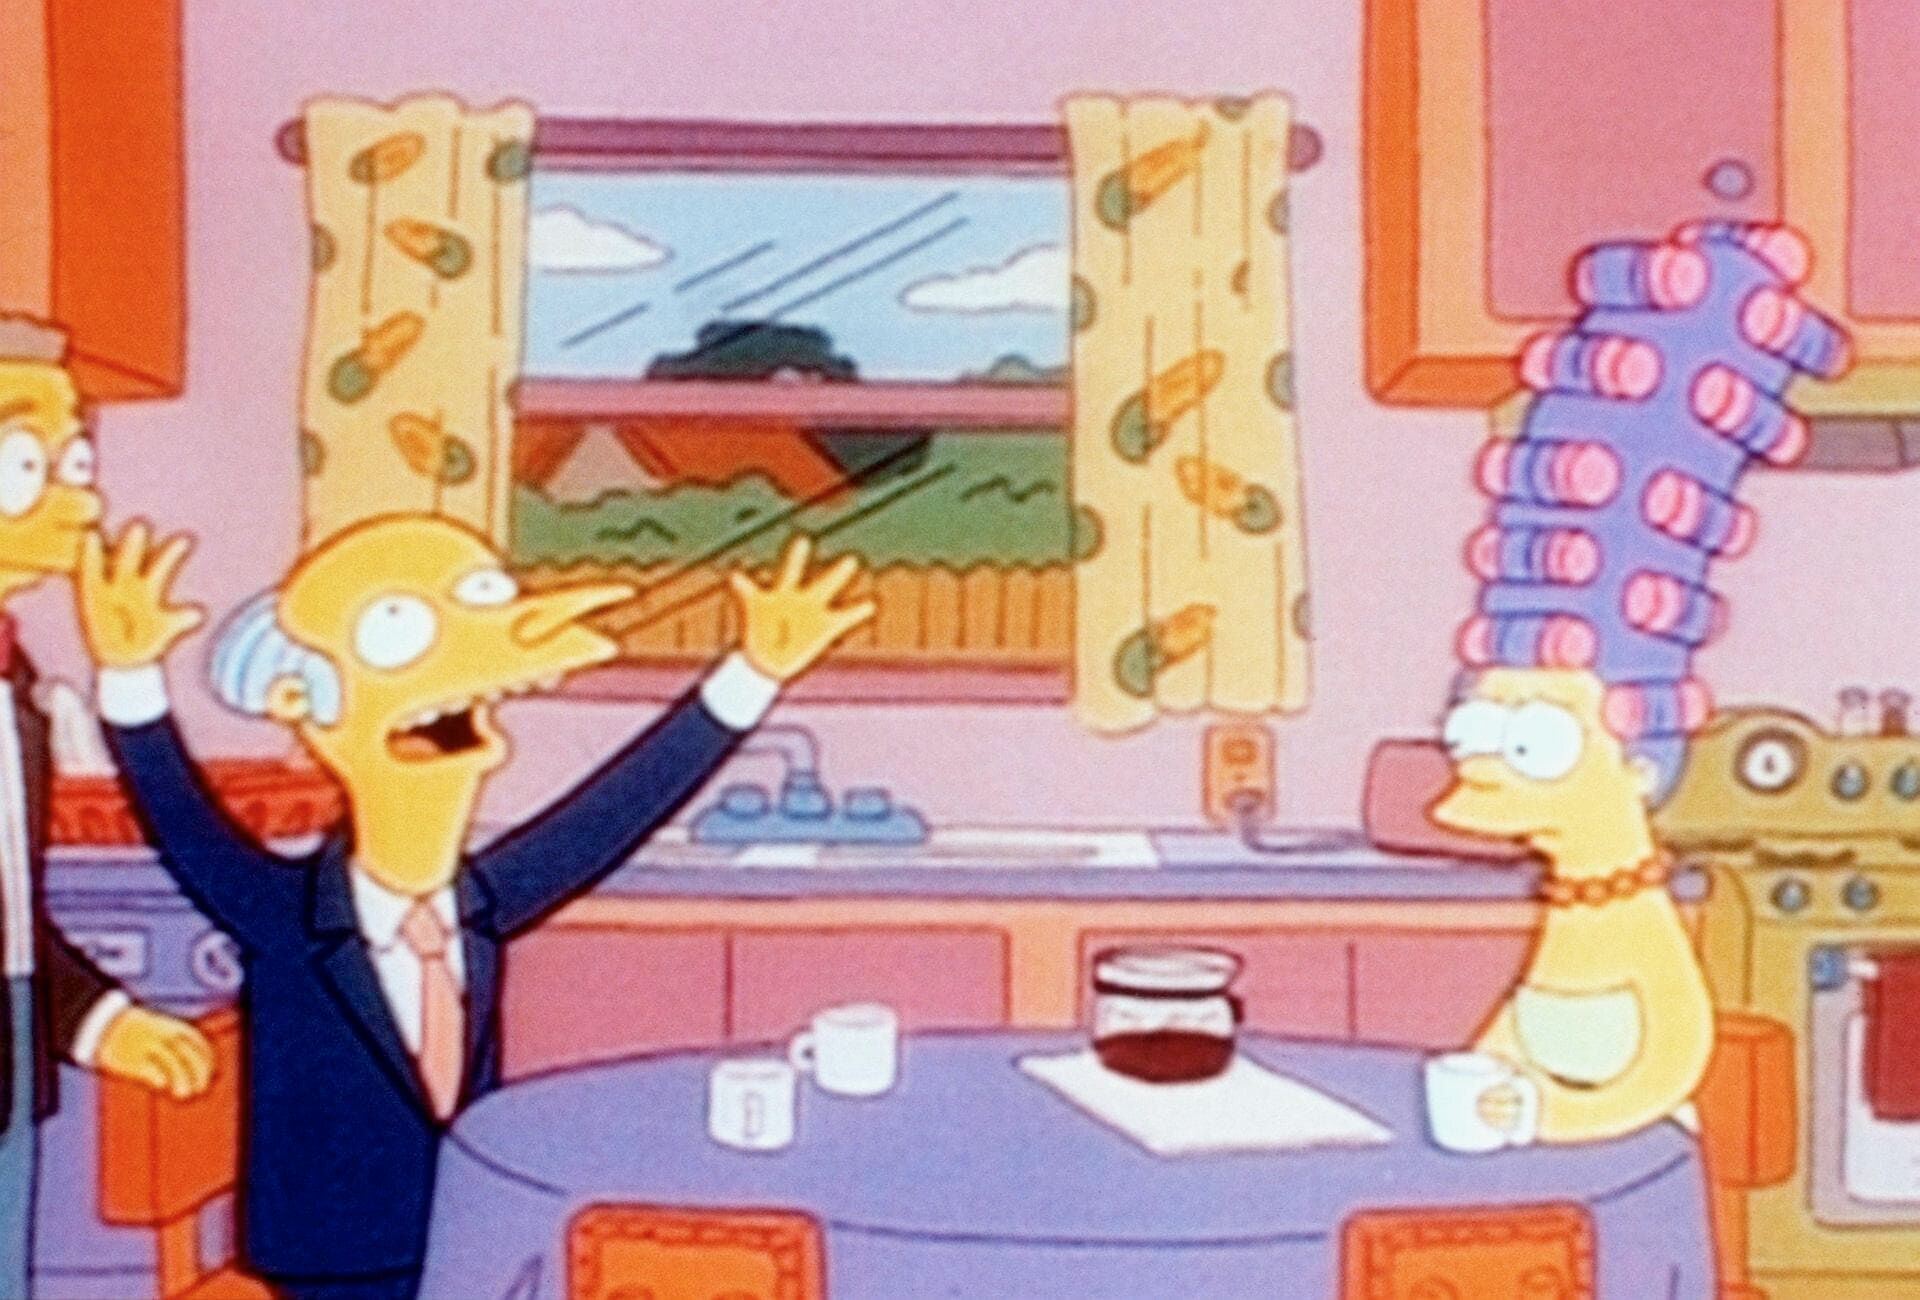 The Simpsons - Brush with Greatness